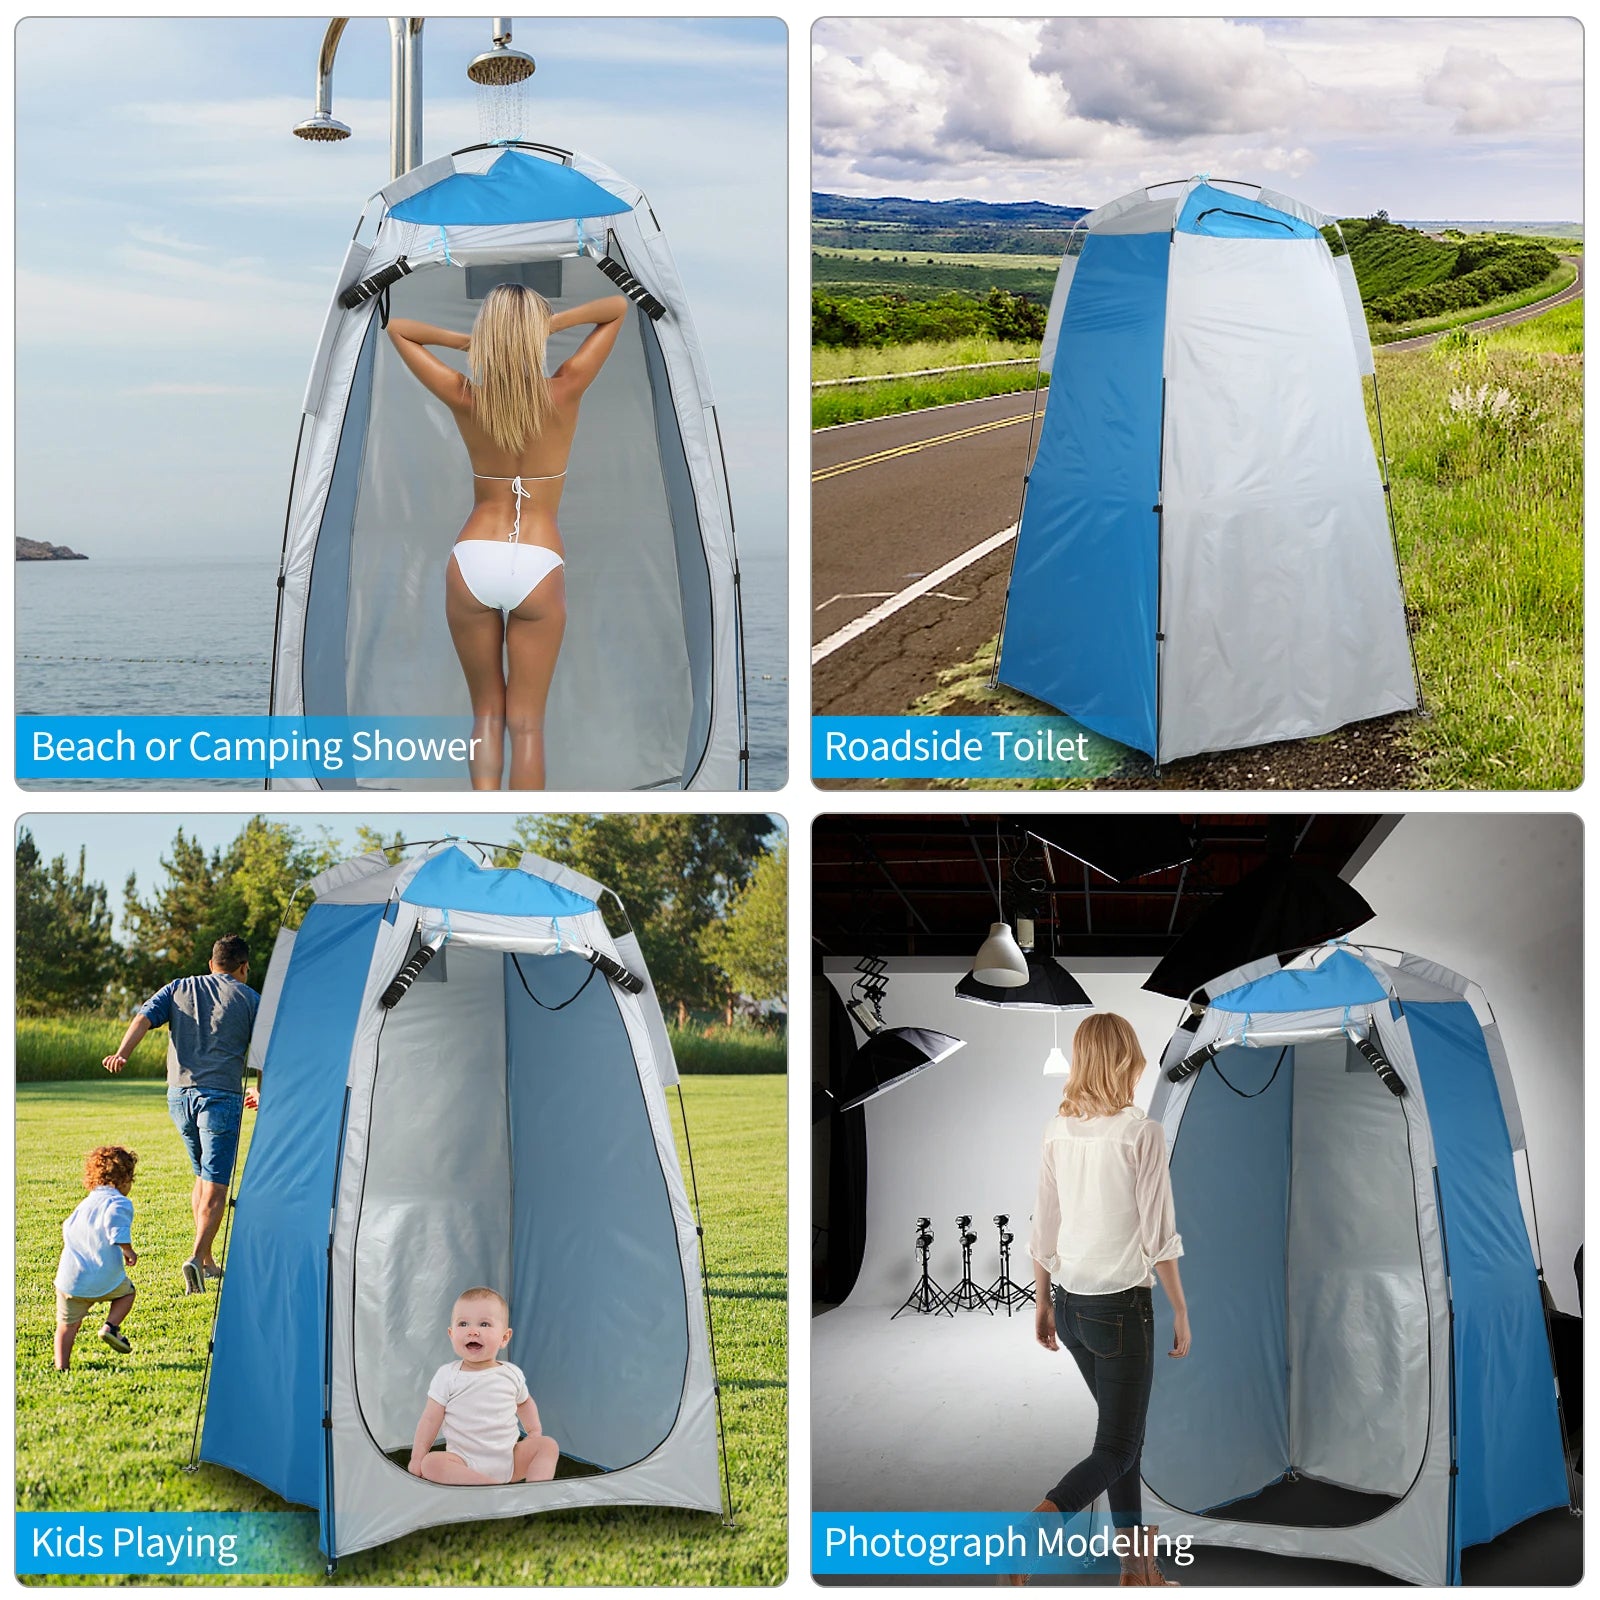 Portable Beach Shower Toilet Changing Tent Sun Rain Shelter Privacy Shelter Tent with Window for Outdoor Camping Bathroom